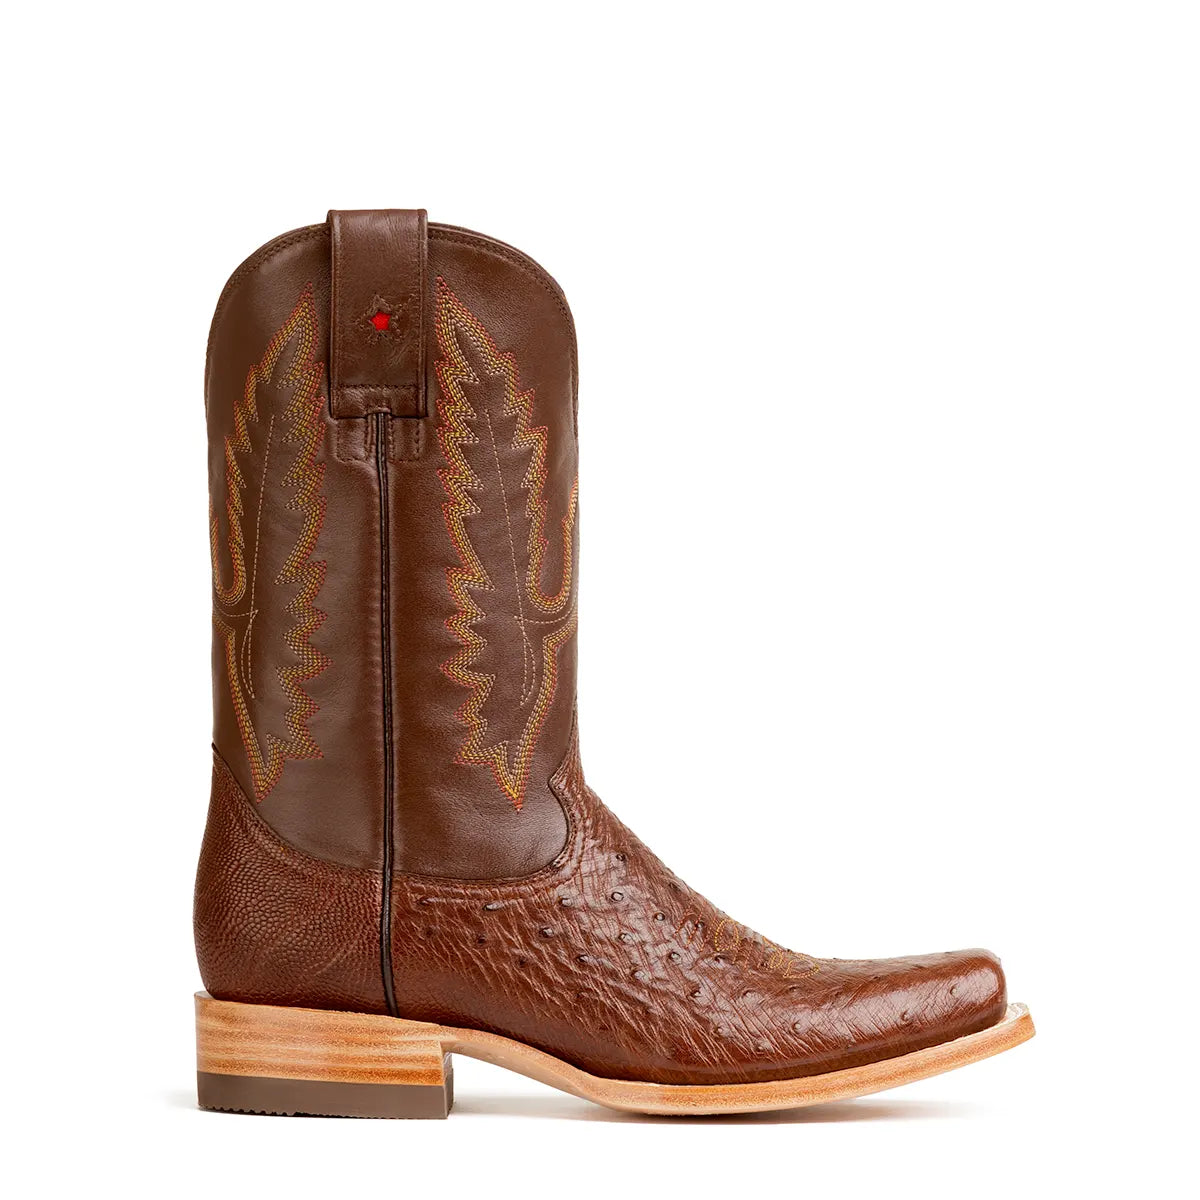 Arroyo Smooth Ostrich Stockman Square Toe Boot - Tobacco Brown